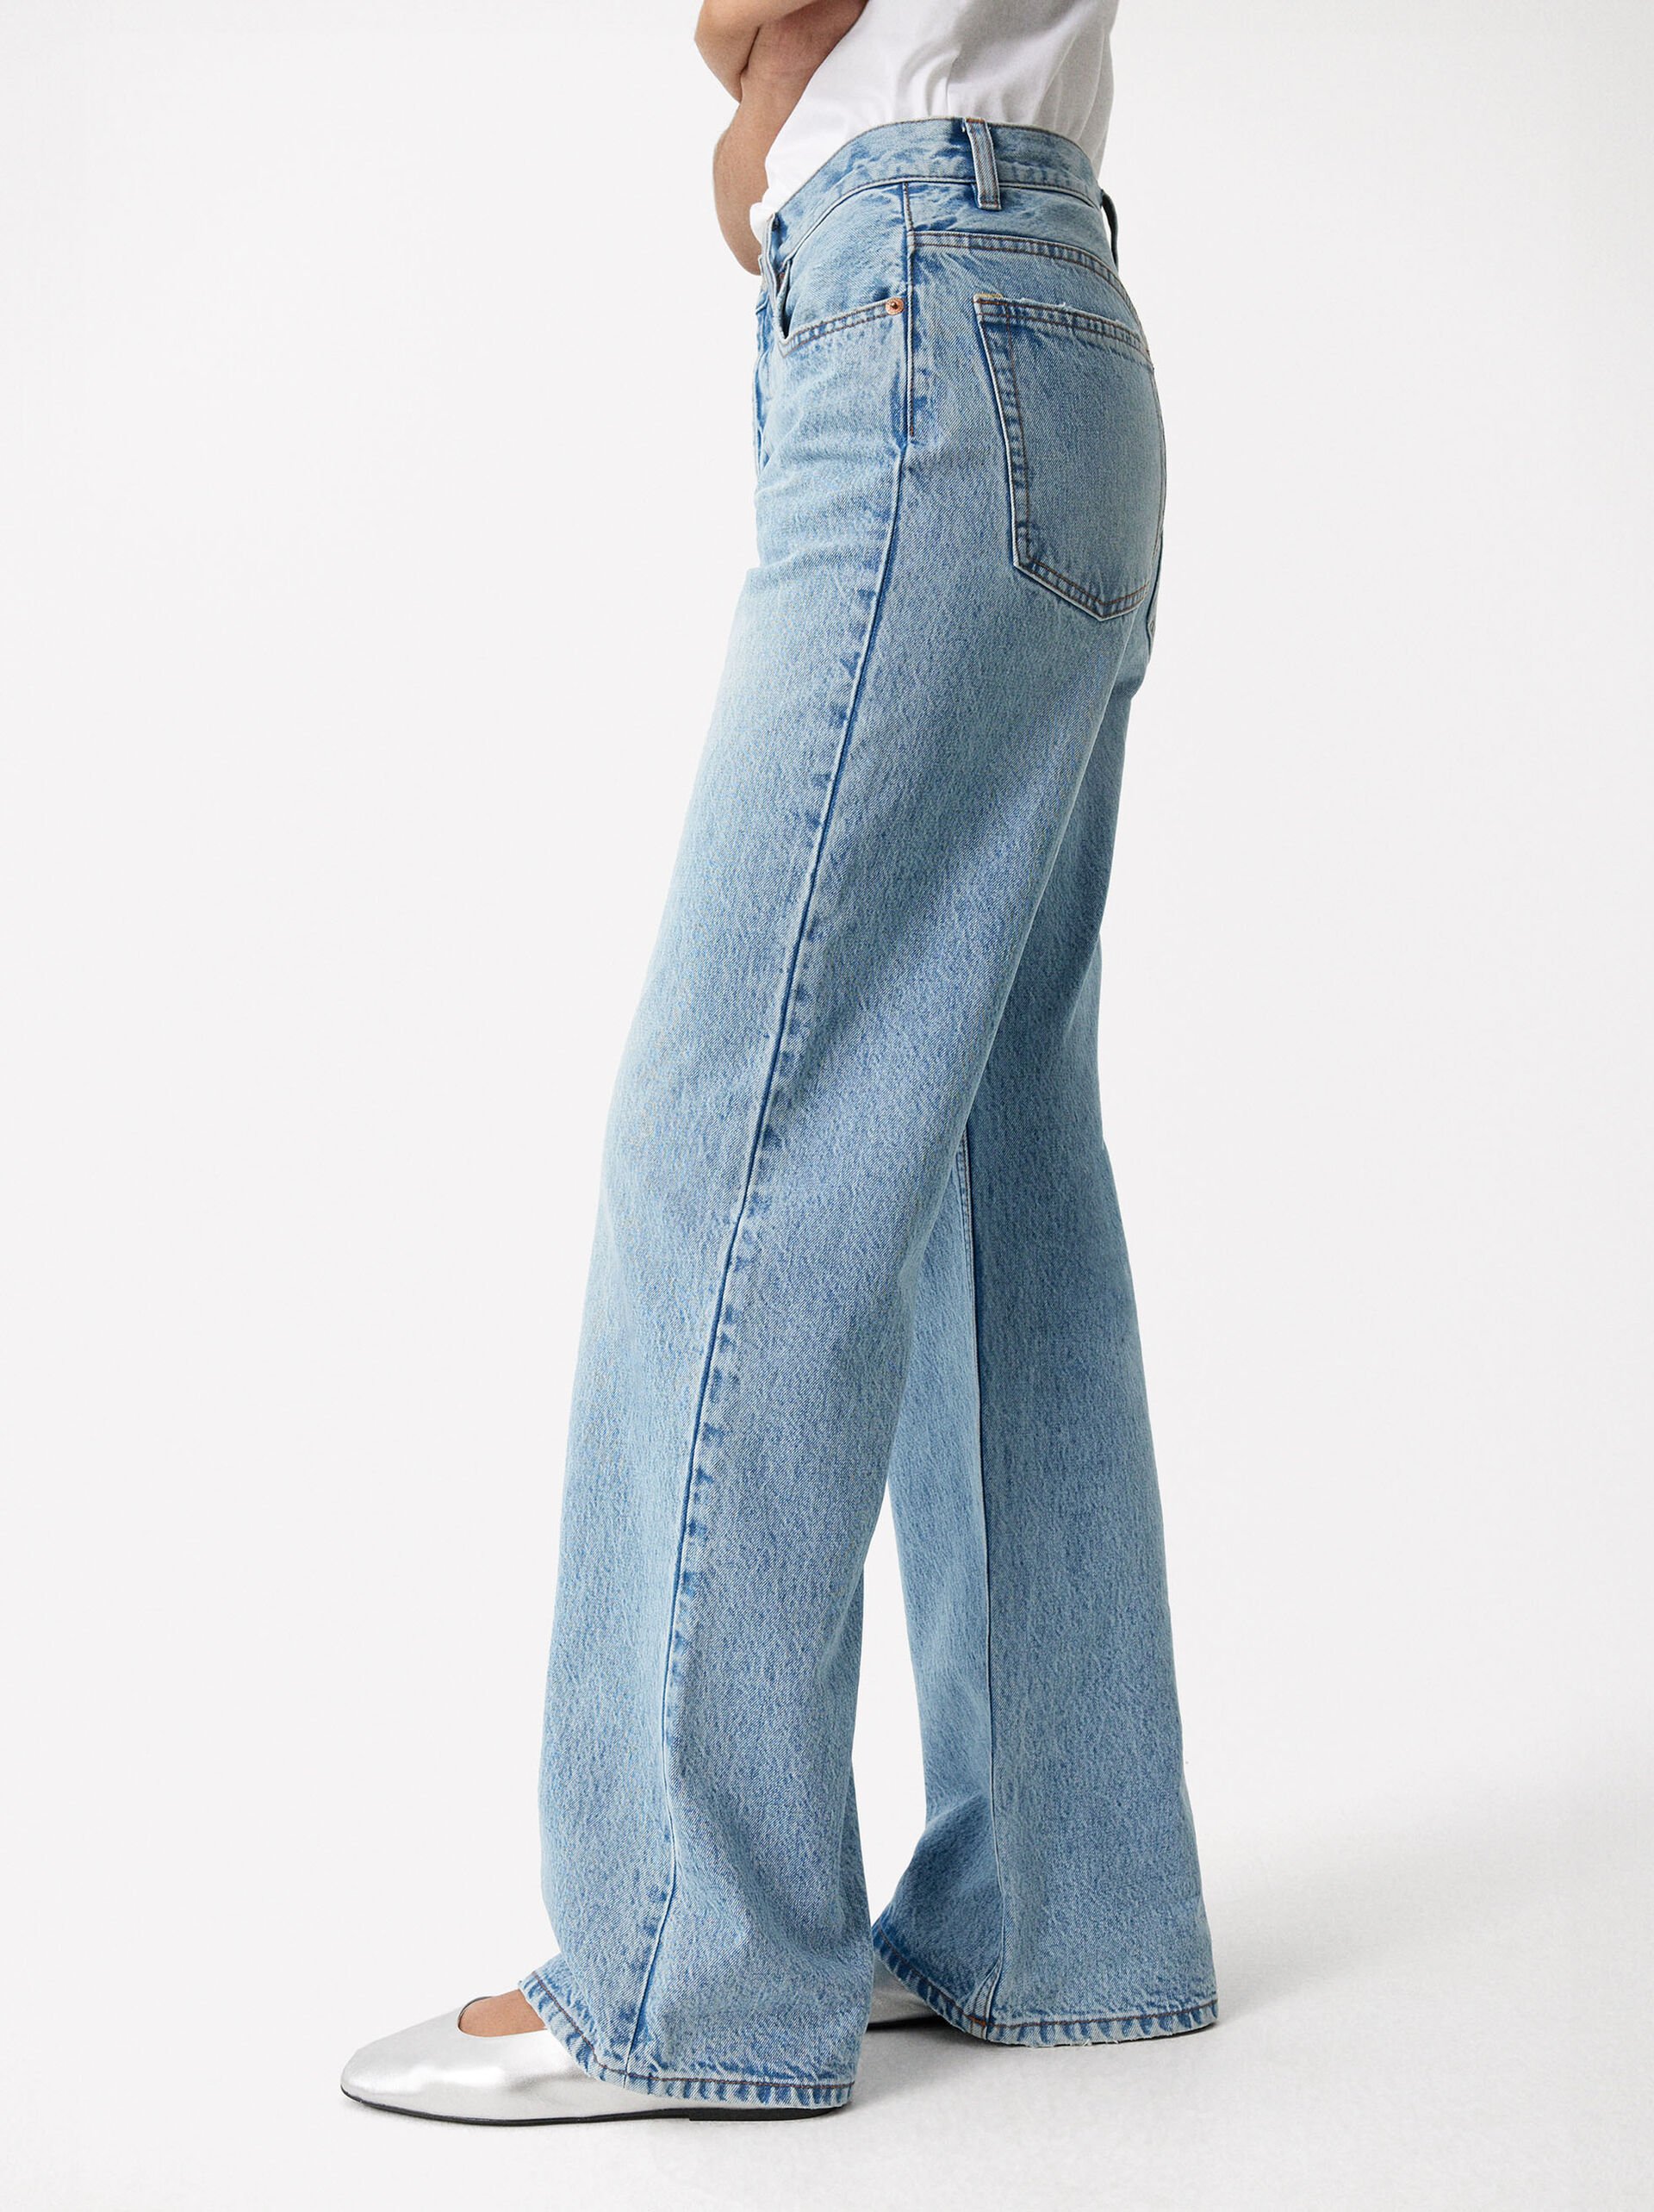 Straight Fit Jeans image number 4.0